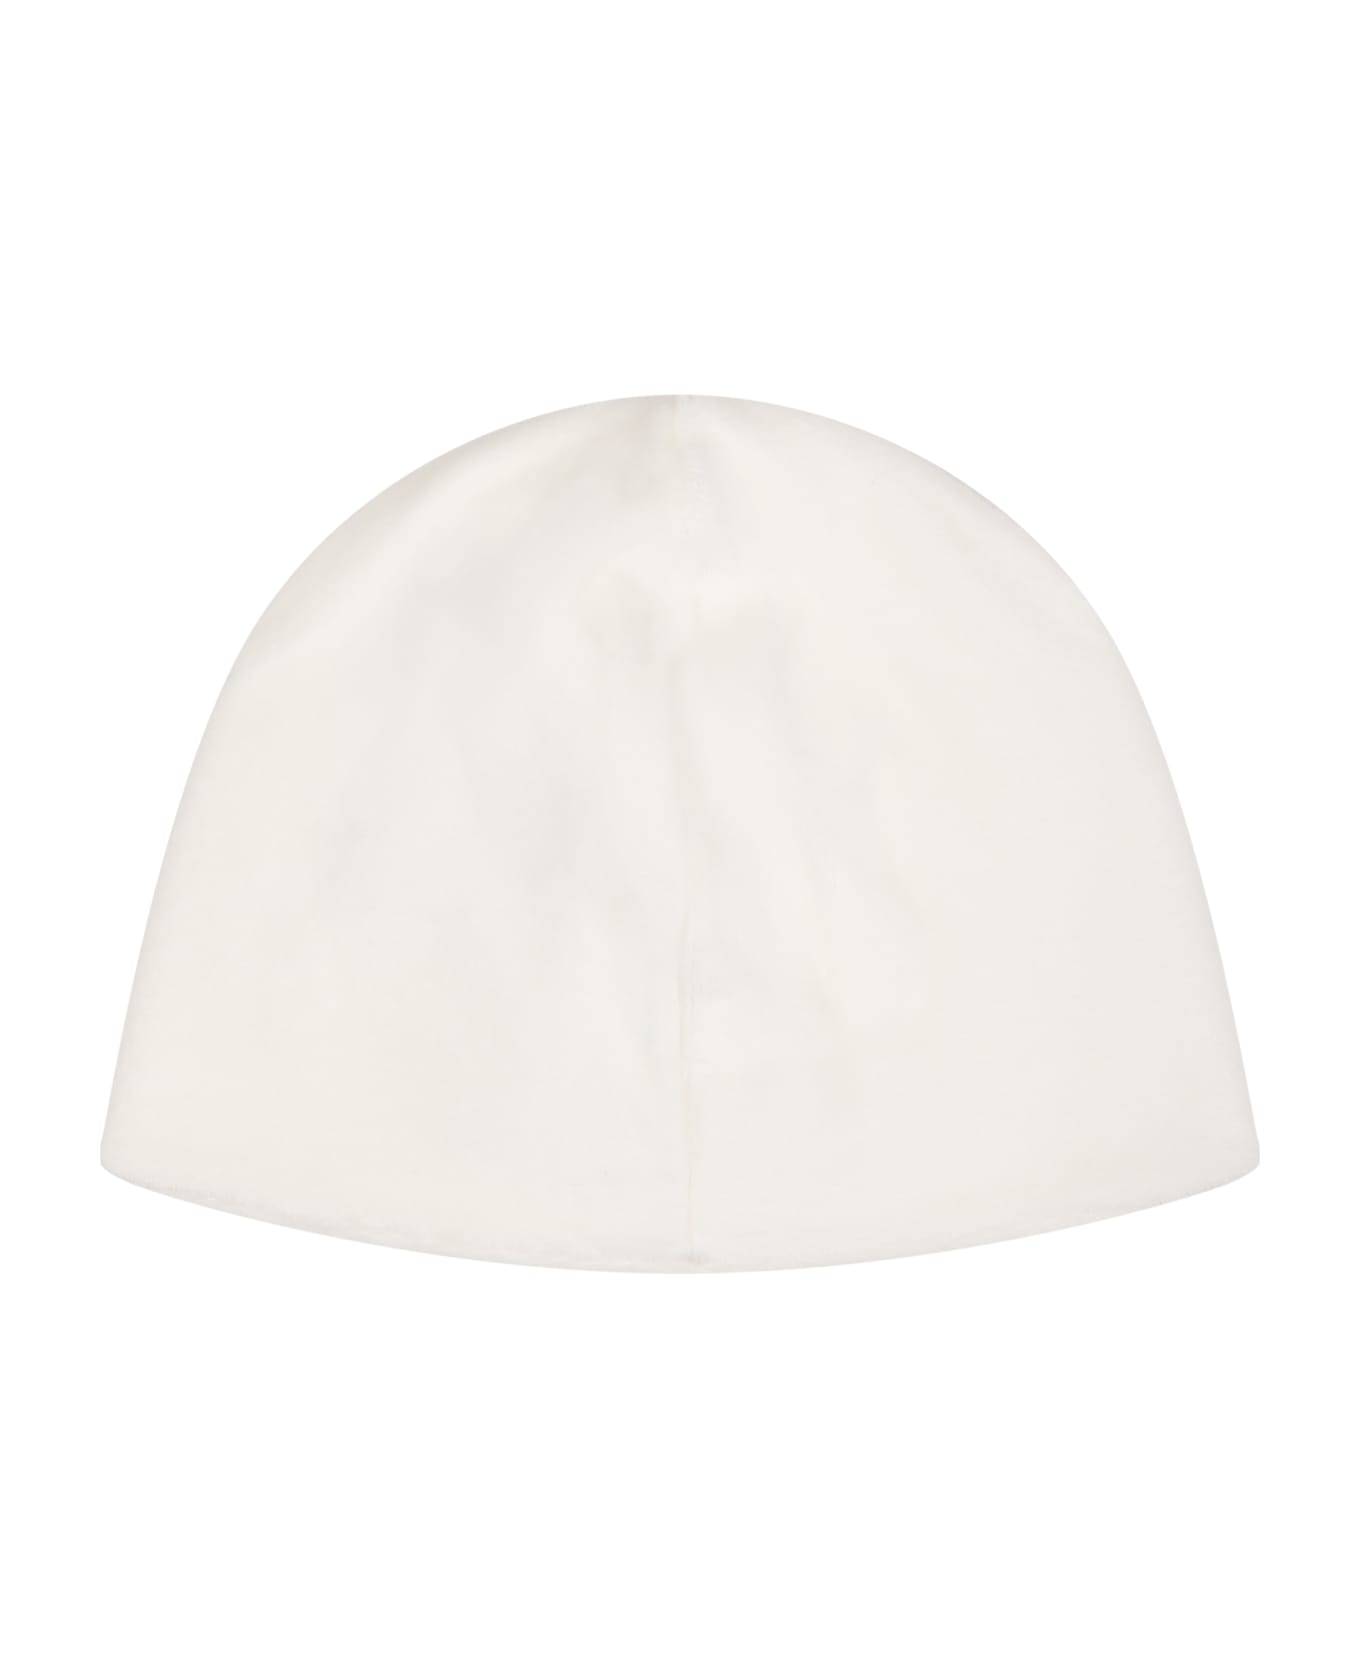 La stupenderia White Hat For Baby Girl With Heart - White アクセサリー＆ギフト